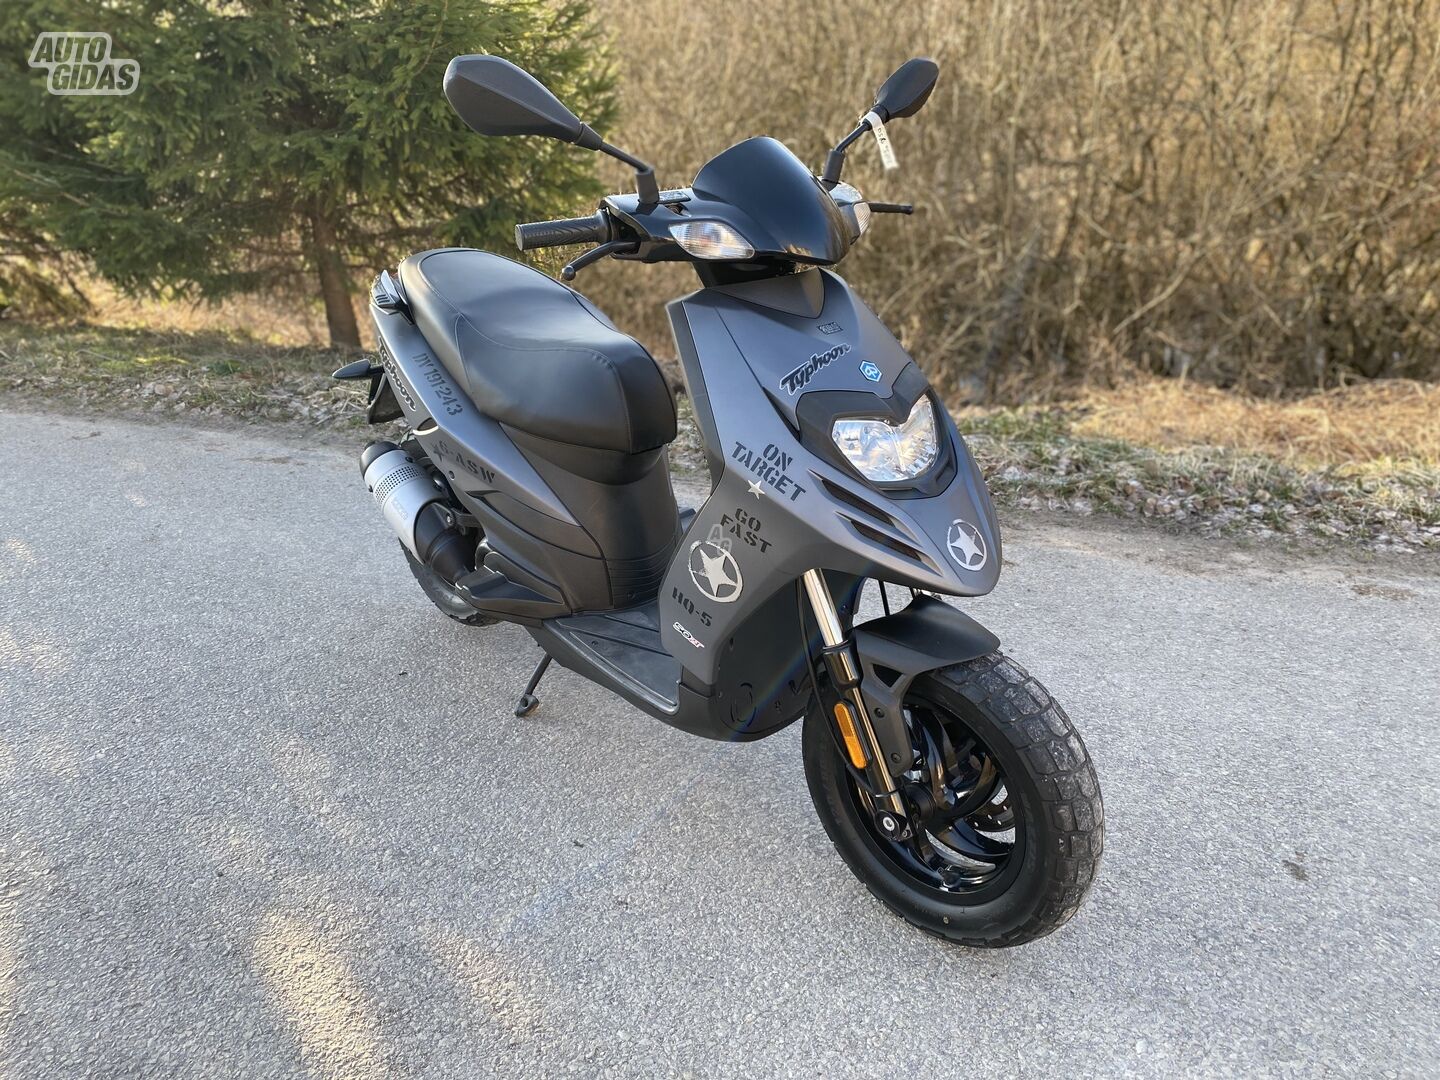 Piaggio Typhoon 2015 y Scooter / moped